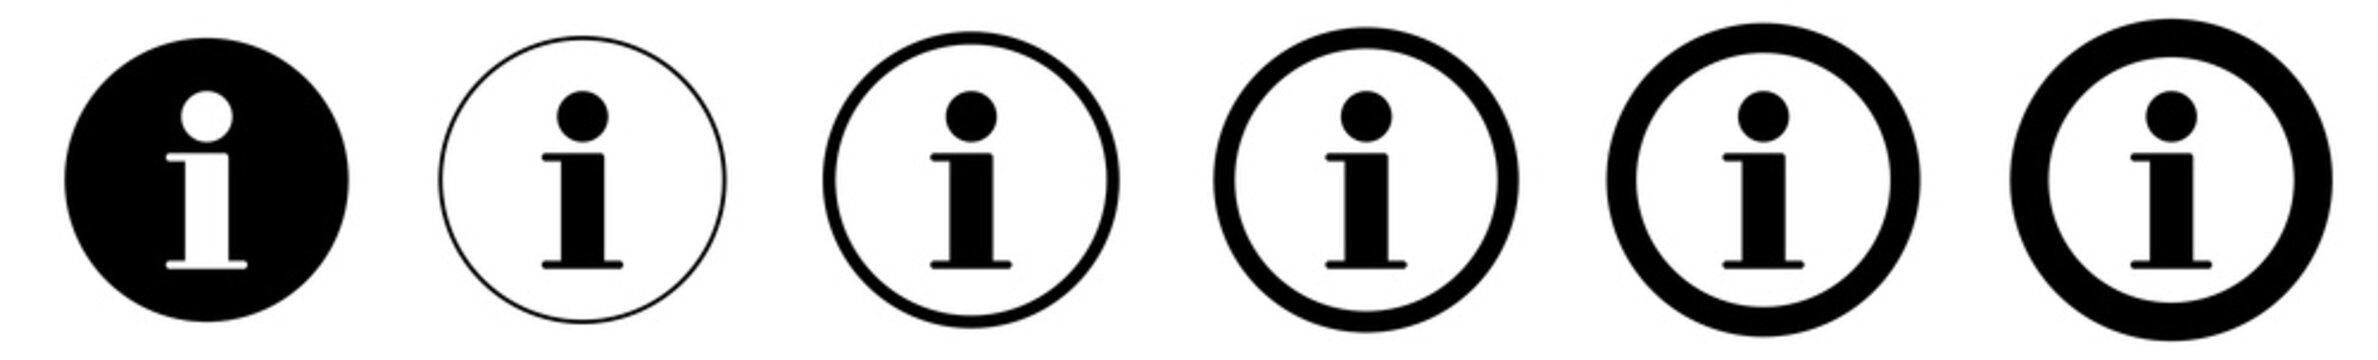 Info Point Icon Black Circle | Information Illustration | i Point Symbol | Help Logo | Hint Sign | Isolated | Variations